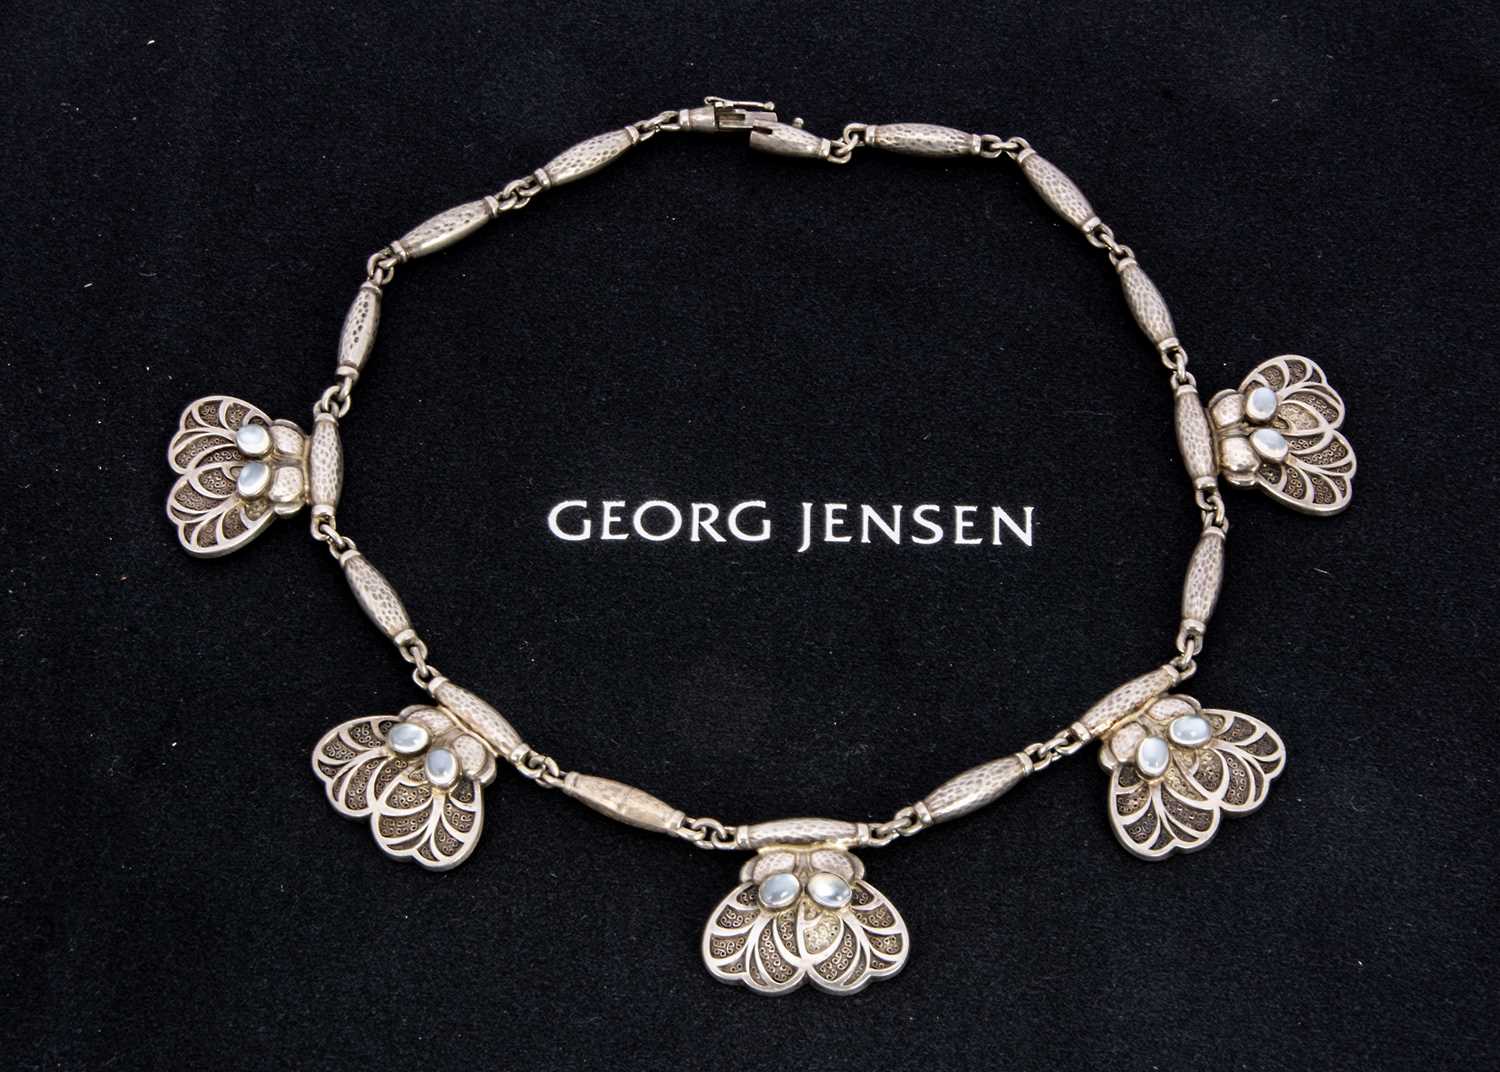 Georg Jensen silver and moonstone fringe necklace no. 4,